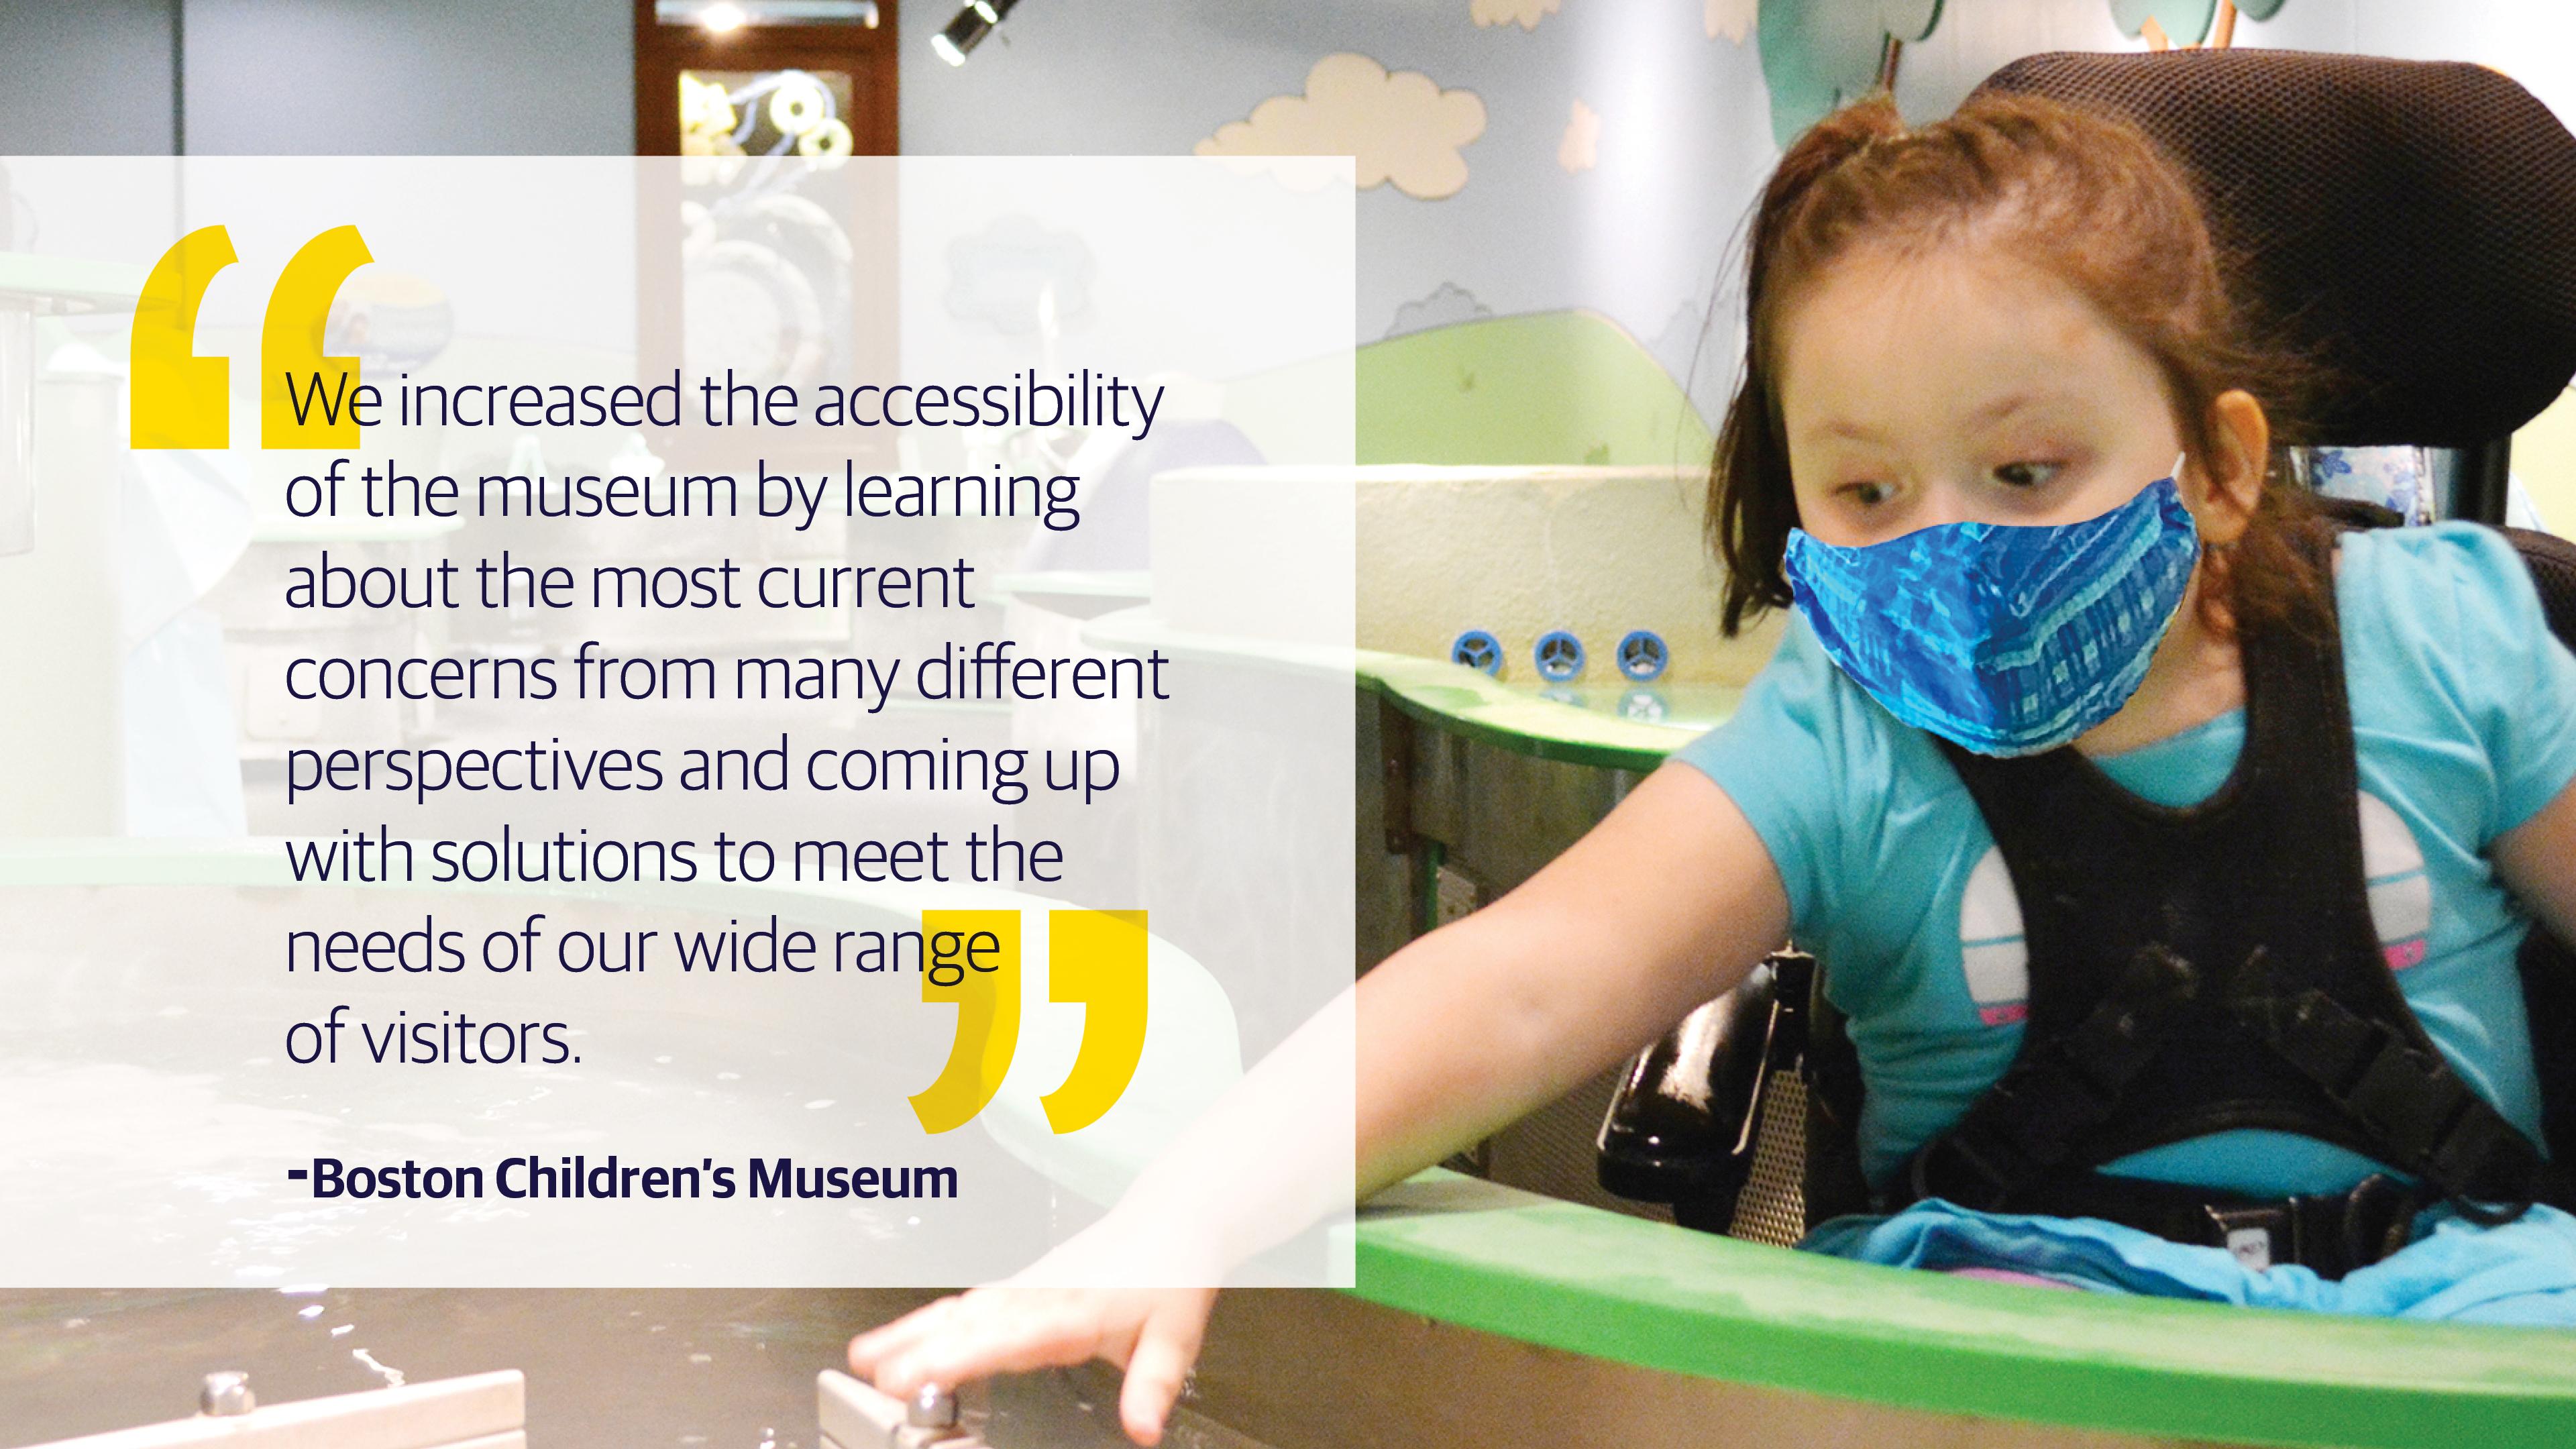 (slide 1 of 4) "We increased the accessibility of the museum by learning about the most current concerns from many different perspectives and coming up with solutions to meet the needs of our wide range of visitors." - Boston Children's Museum . 